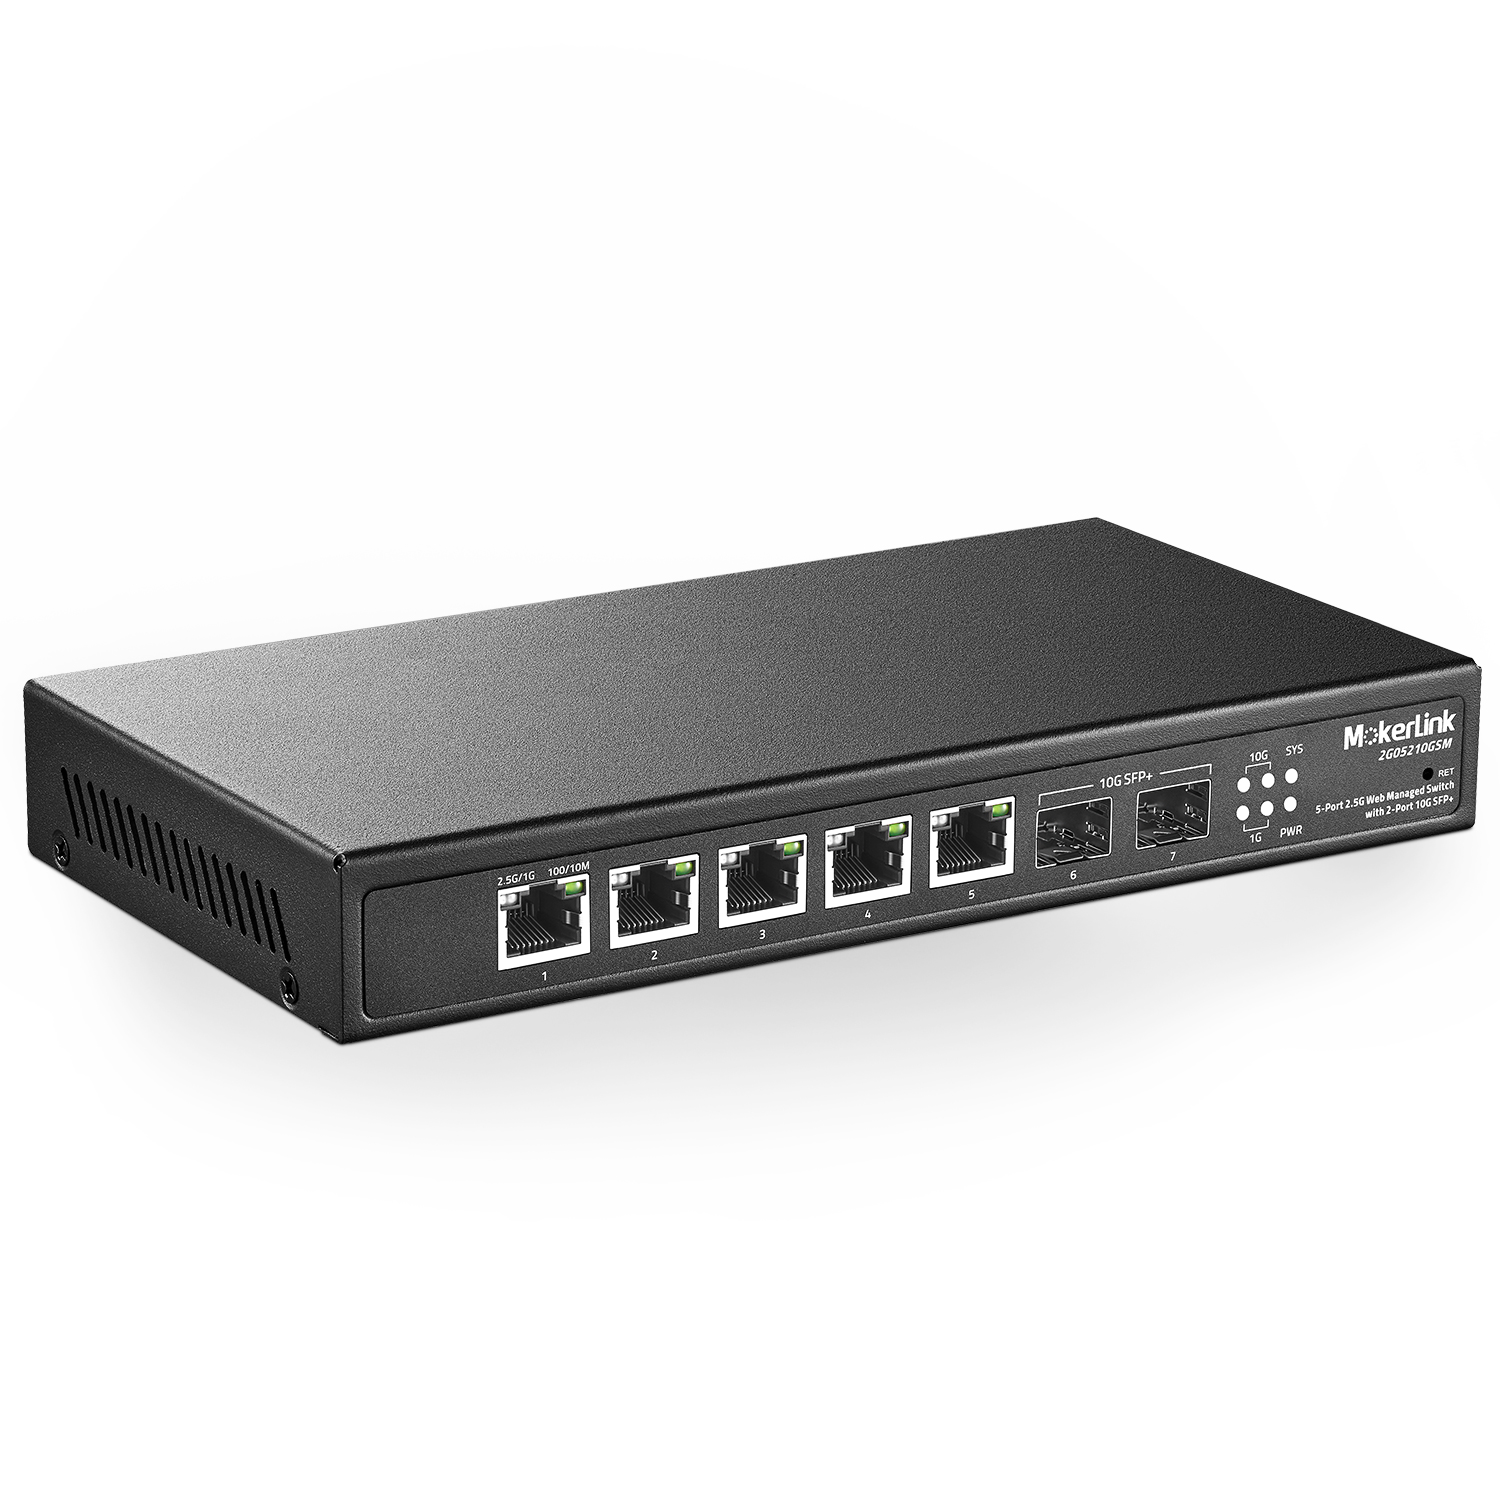 Multi-Gig Switches – 6-Port 10G Switch